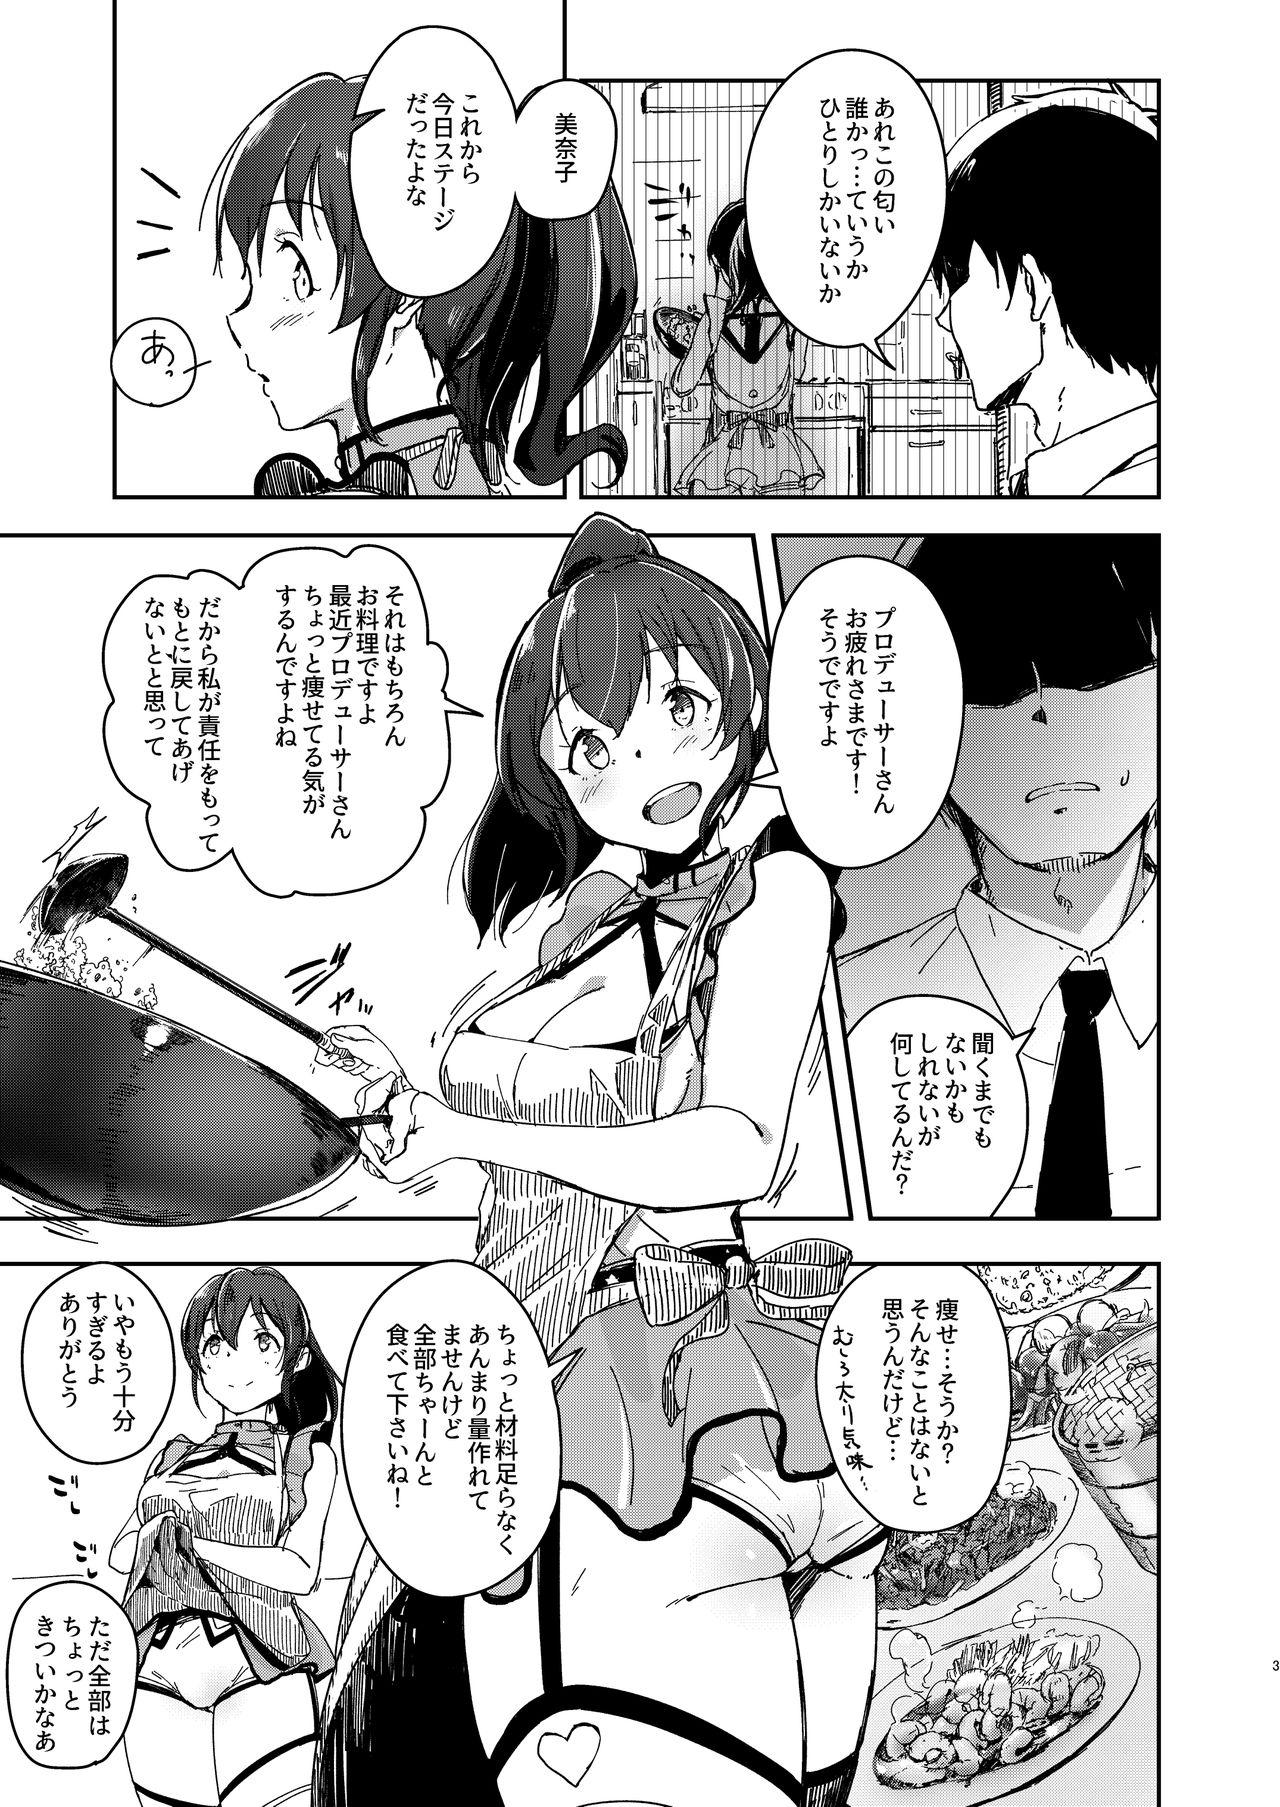 Masseuse TOP! CLOVER BOOK + omake - The idolmaster Stepdaughter - Page 2